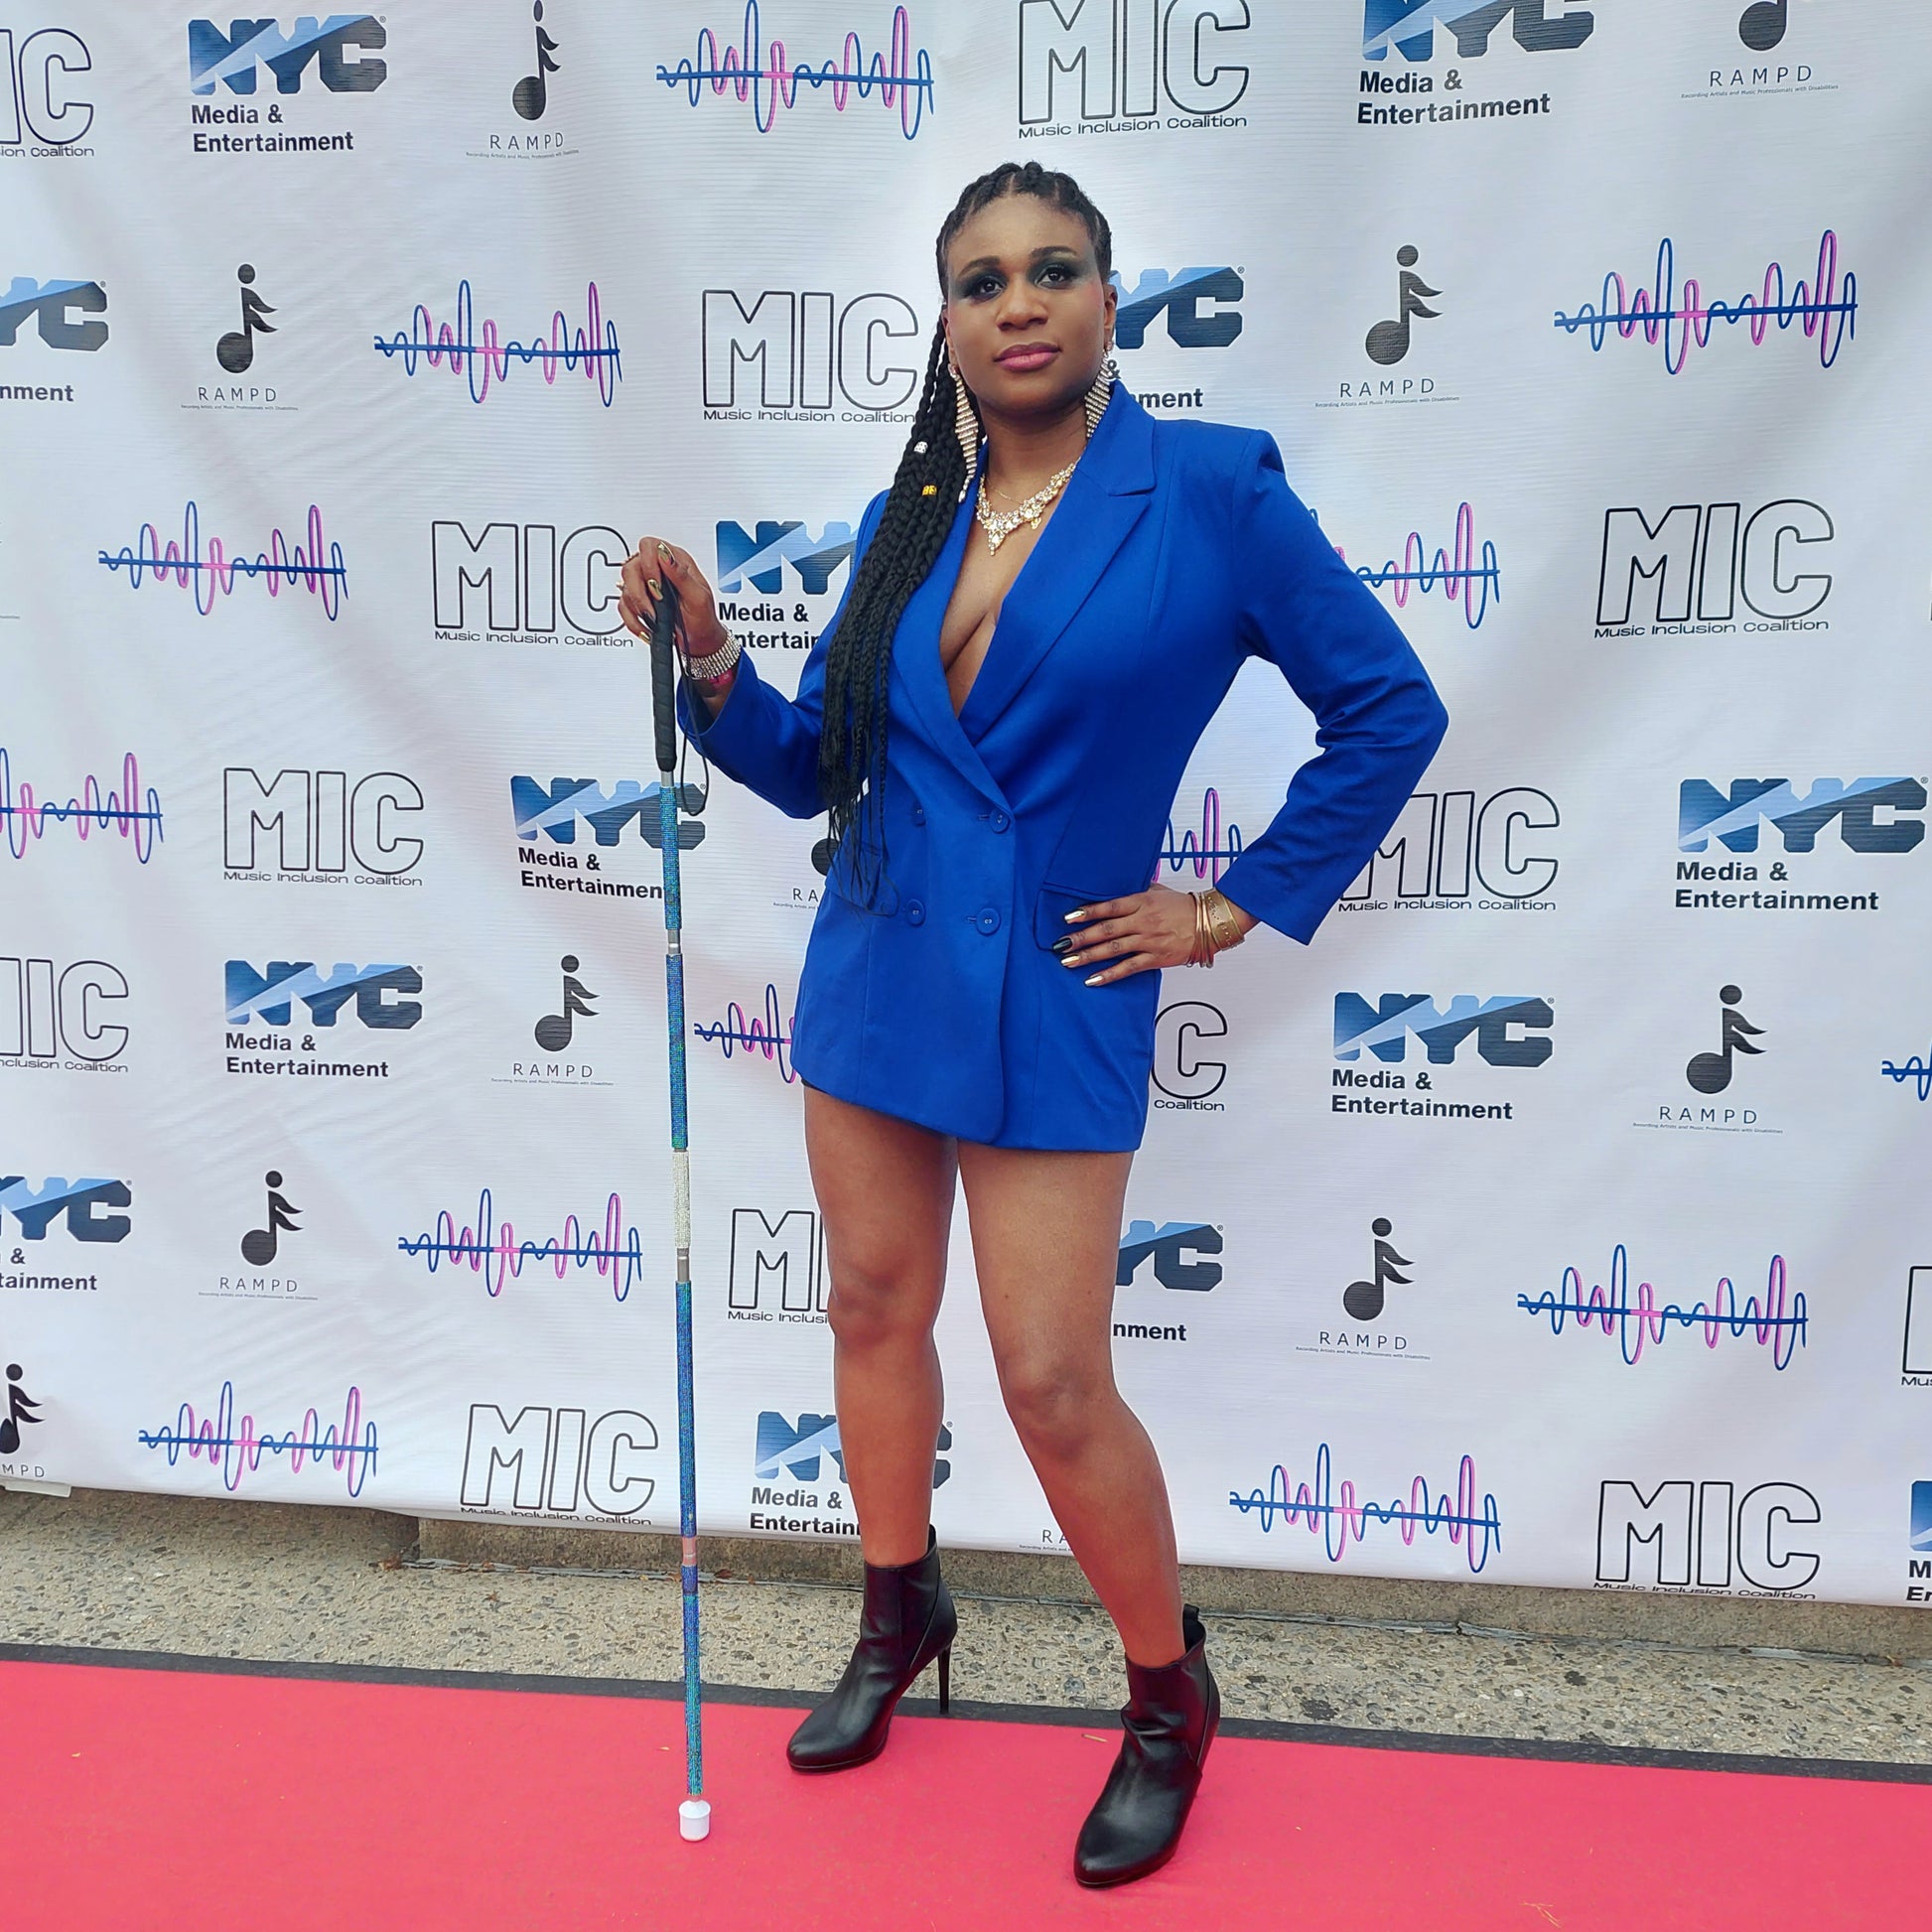 Lachi, a black woman with cornrows, poses in a blue dress with a blue and white rhinestone glam cane